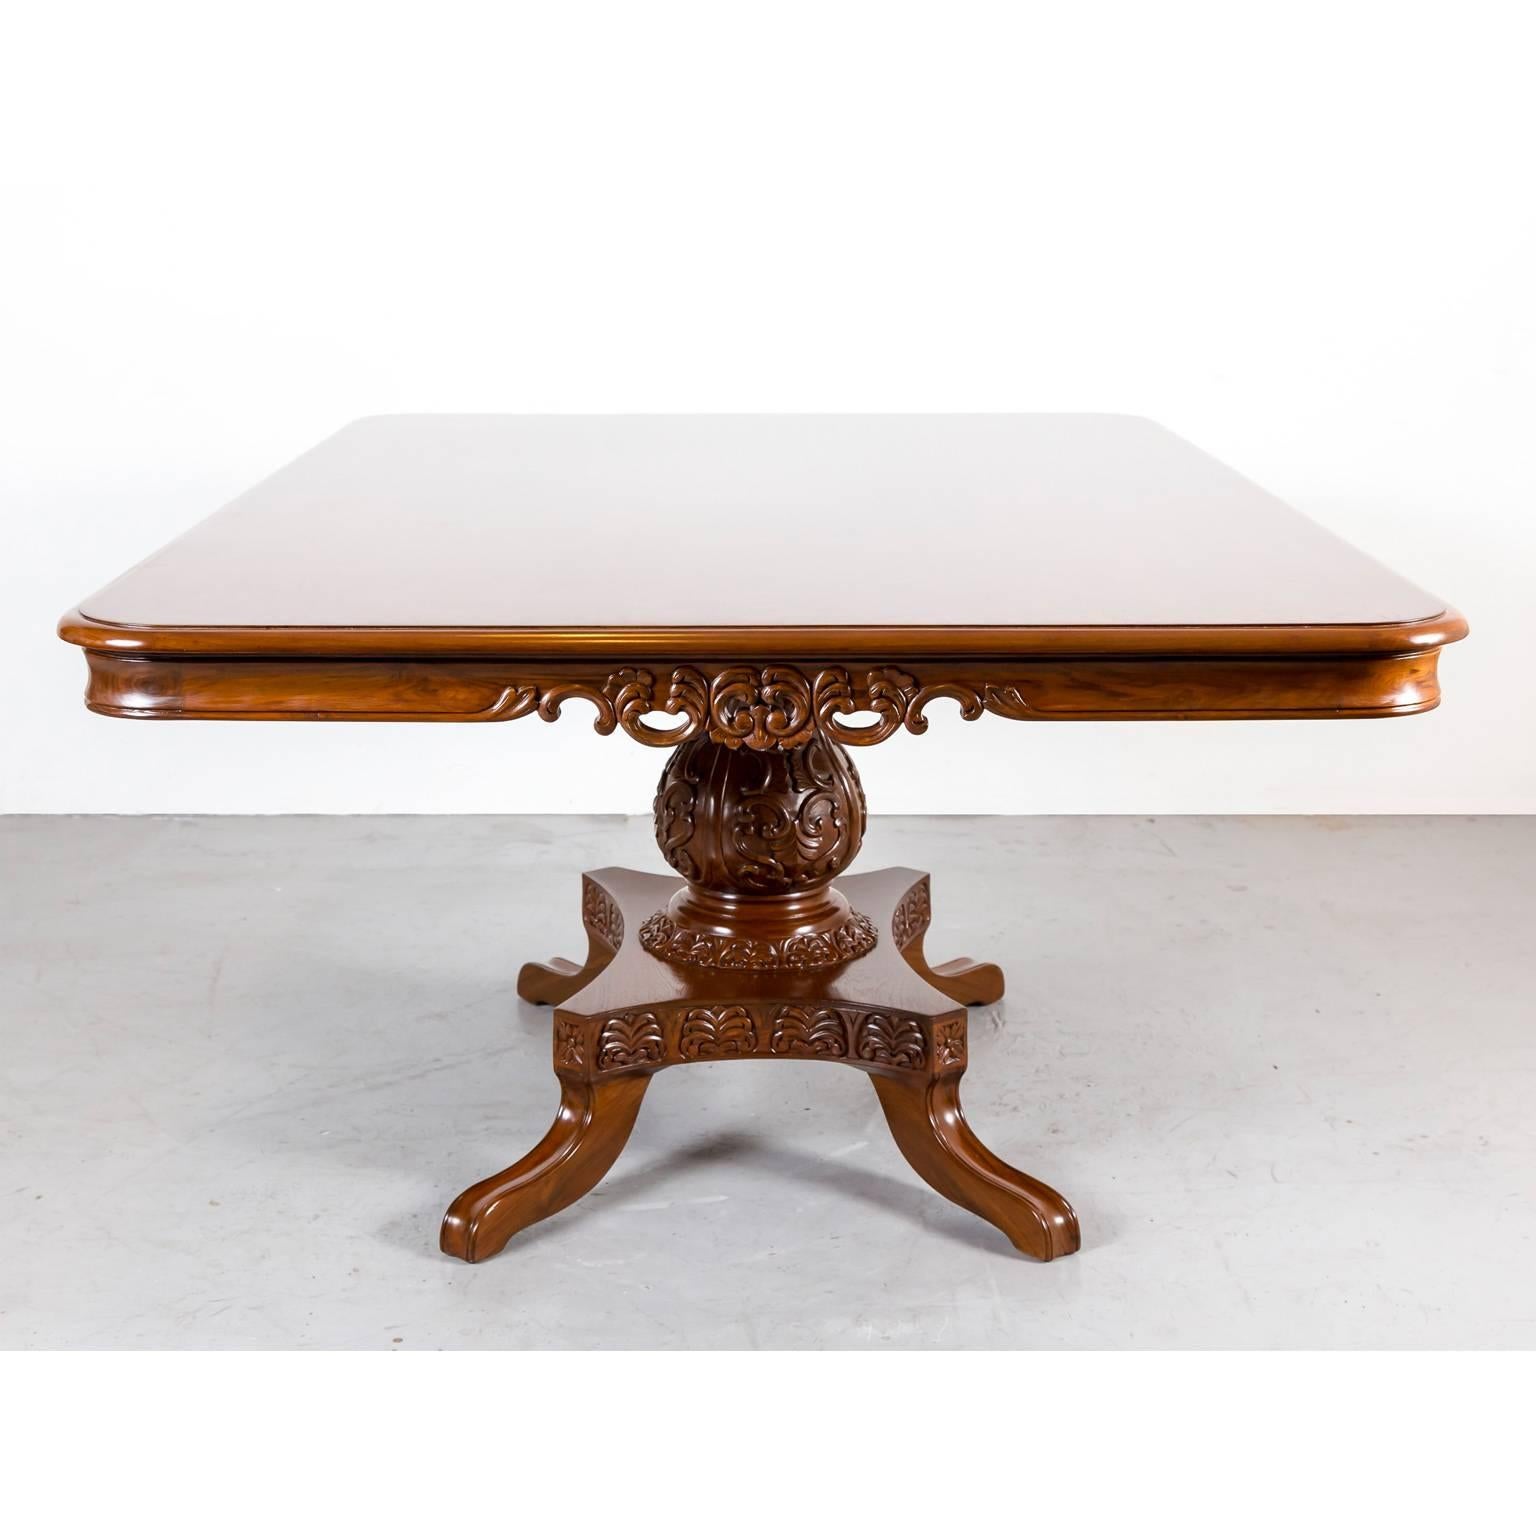 Antique Anglo-Indian or British Colonial Teak Wood Dining Table In Excellent Condition For Sale In Singapore, SG